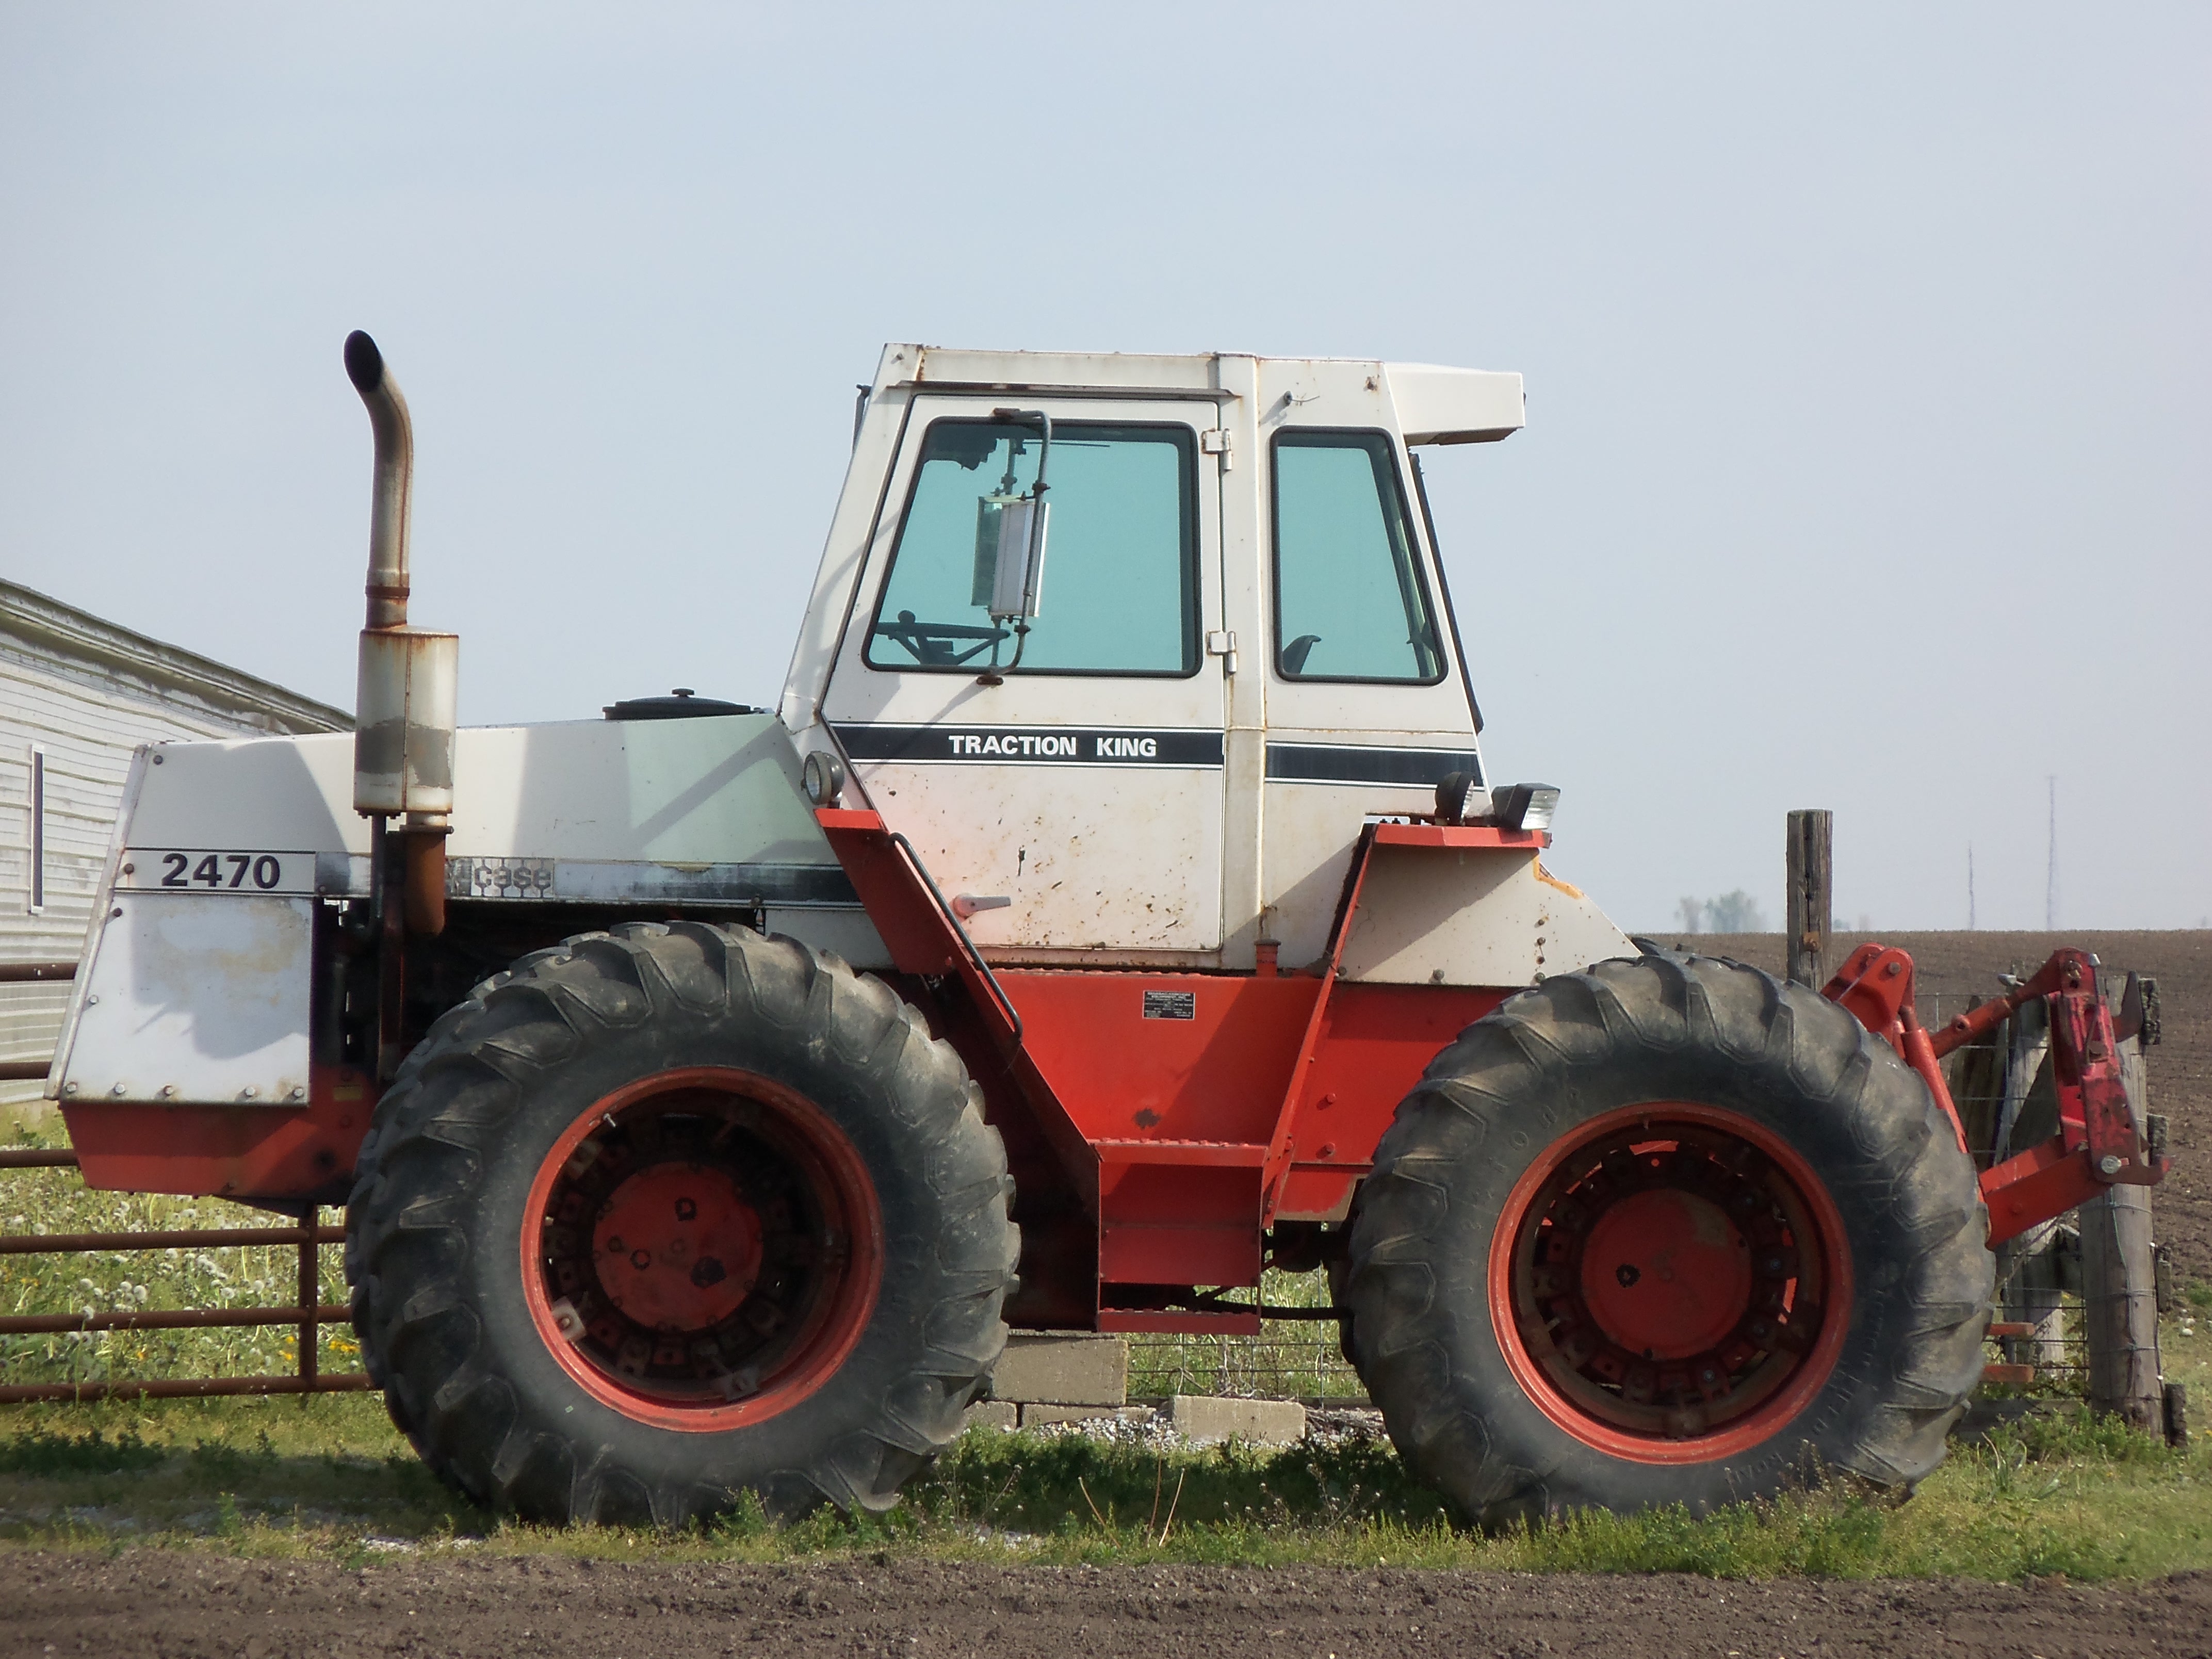 ... here in 1974 when J I Case bought David Brown tractors in England